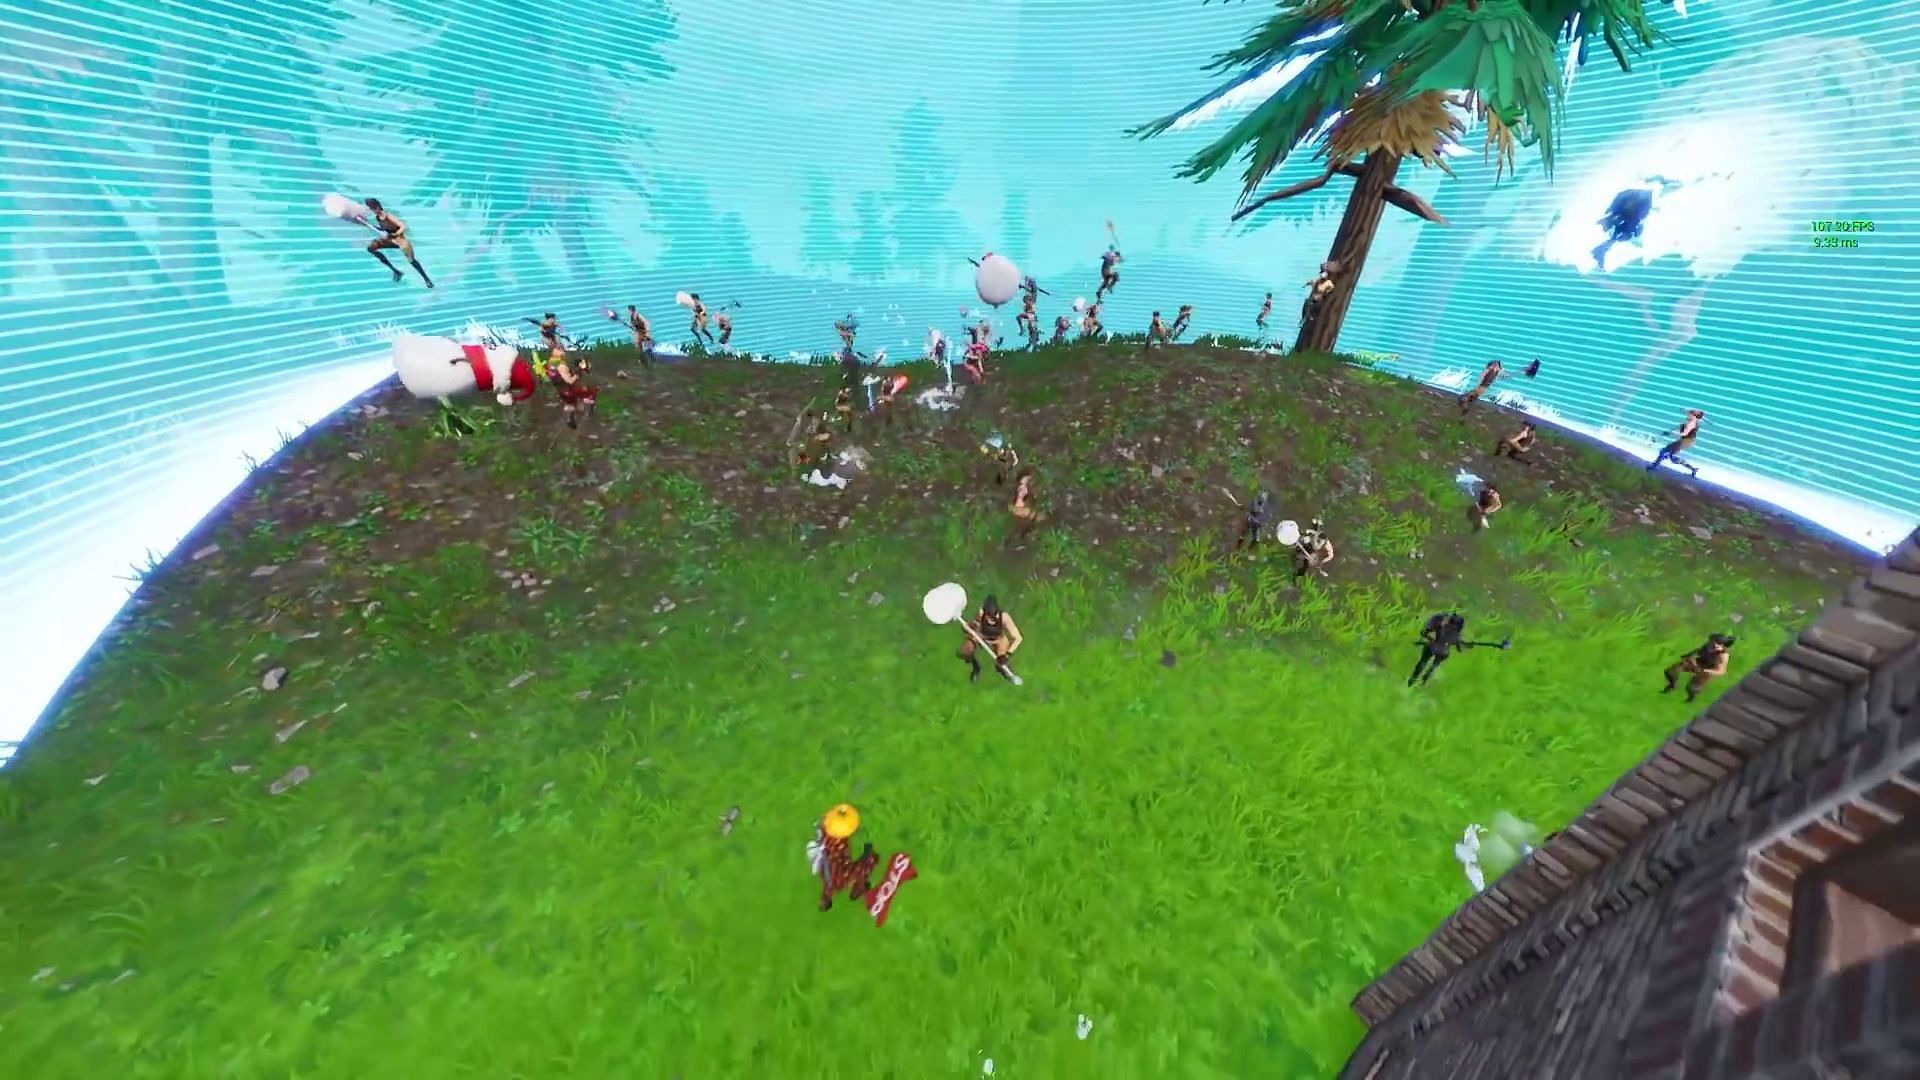 Lazarbeam asked players to engage in a Pickaxe-only battle (Image via YouTube/Lazarbeam)